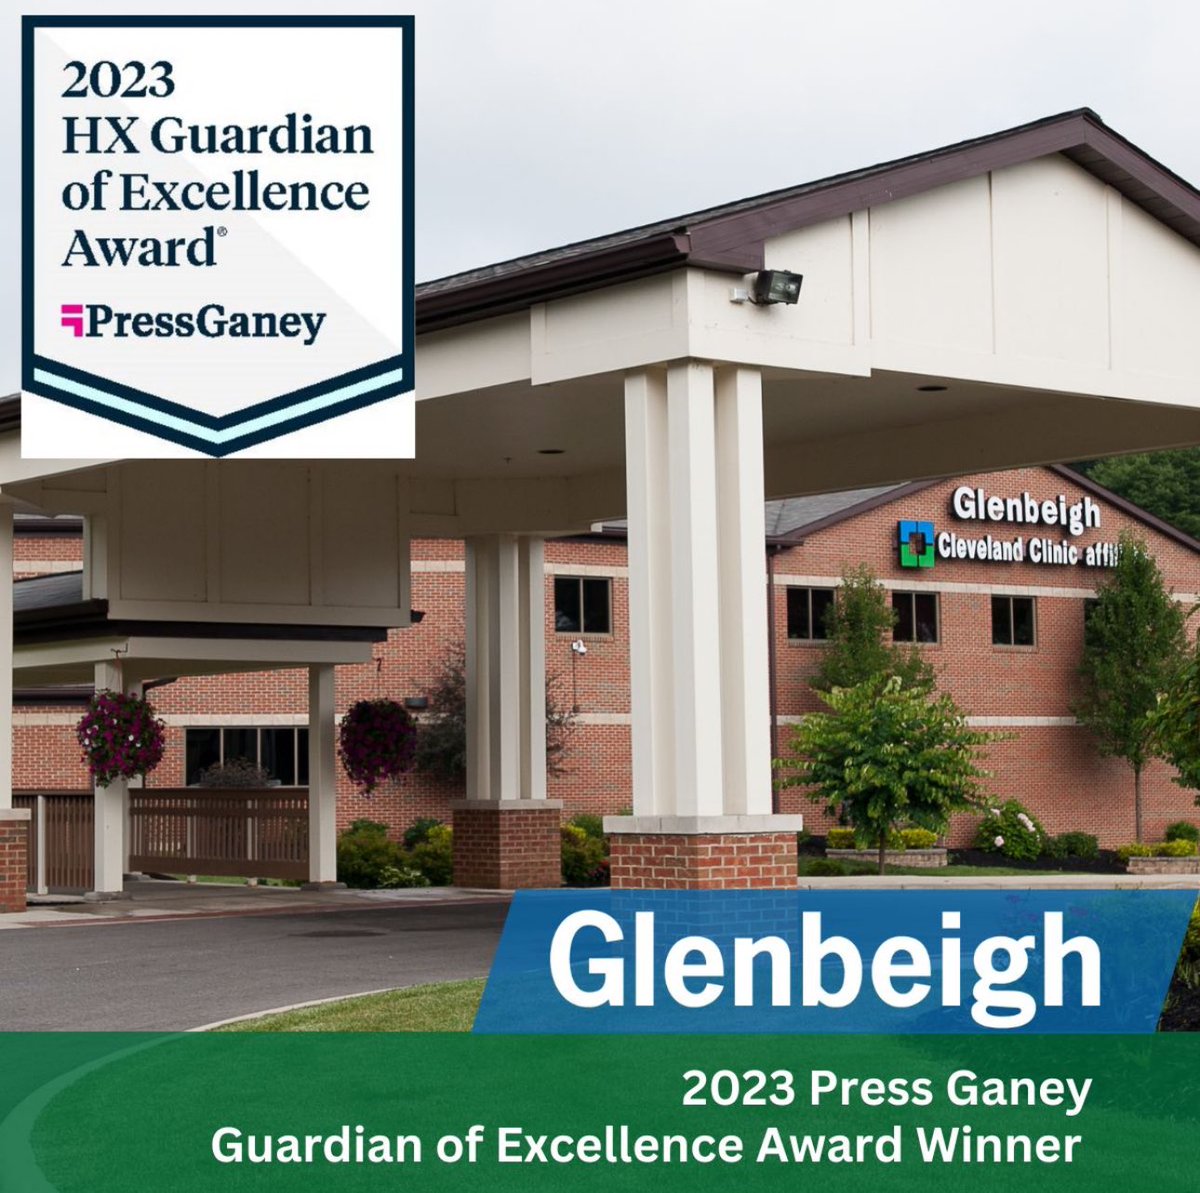 Glenbeigh is proud to receive the 2023 “Guardian of Excellence Award” from PressGaney. The award honors organizations that consistently achieve the highest levels in patient experience and employee & physician engagement. The award is based on patient feedback after discharge.